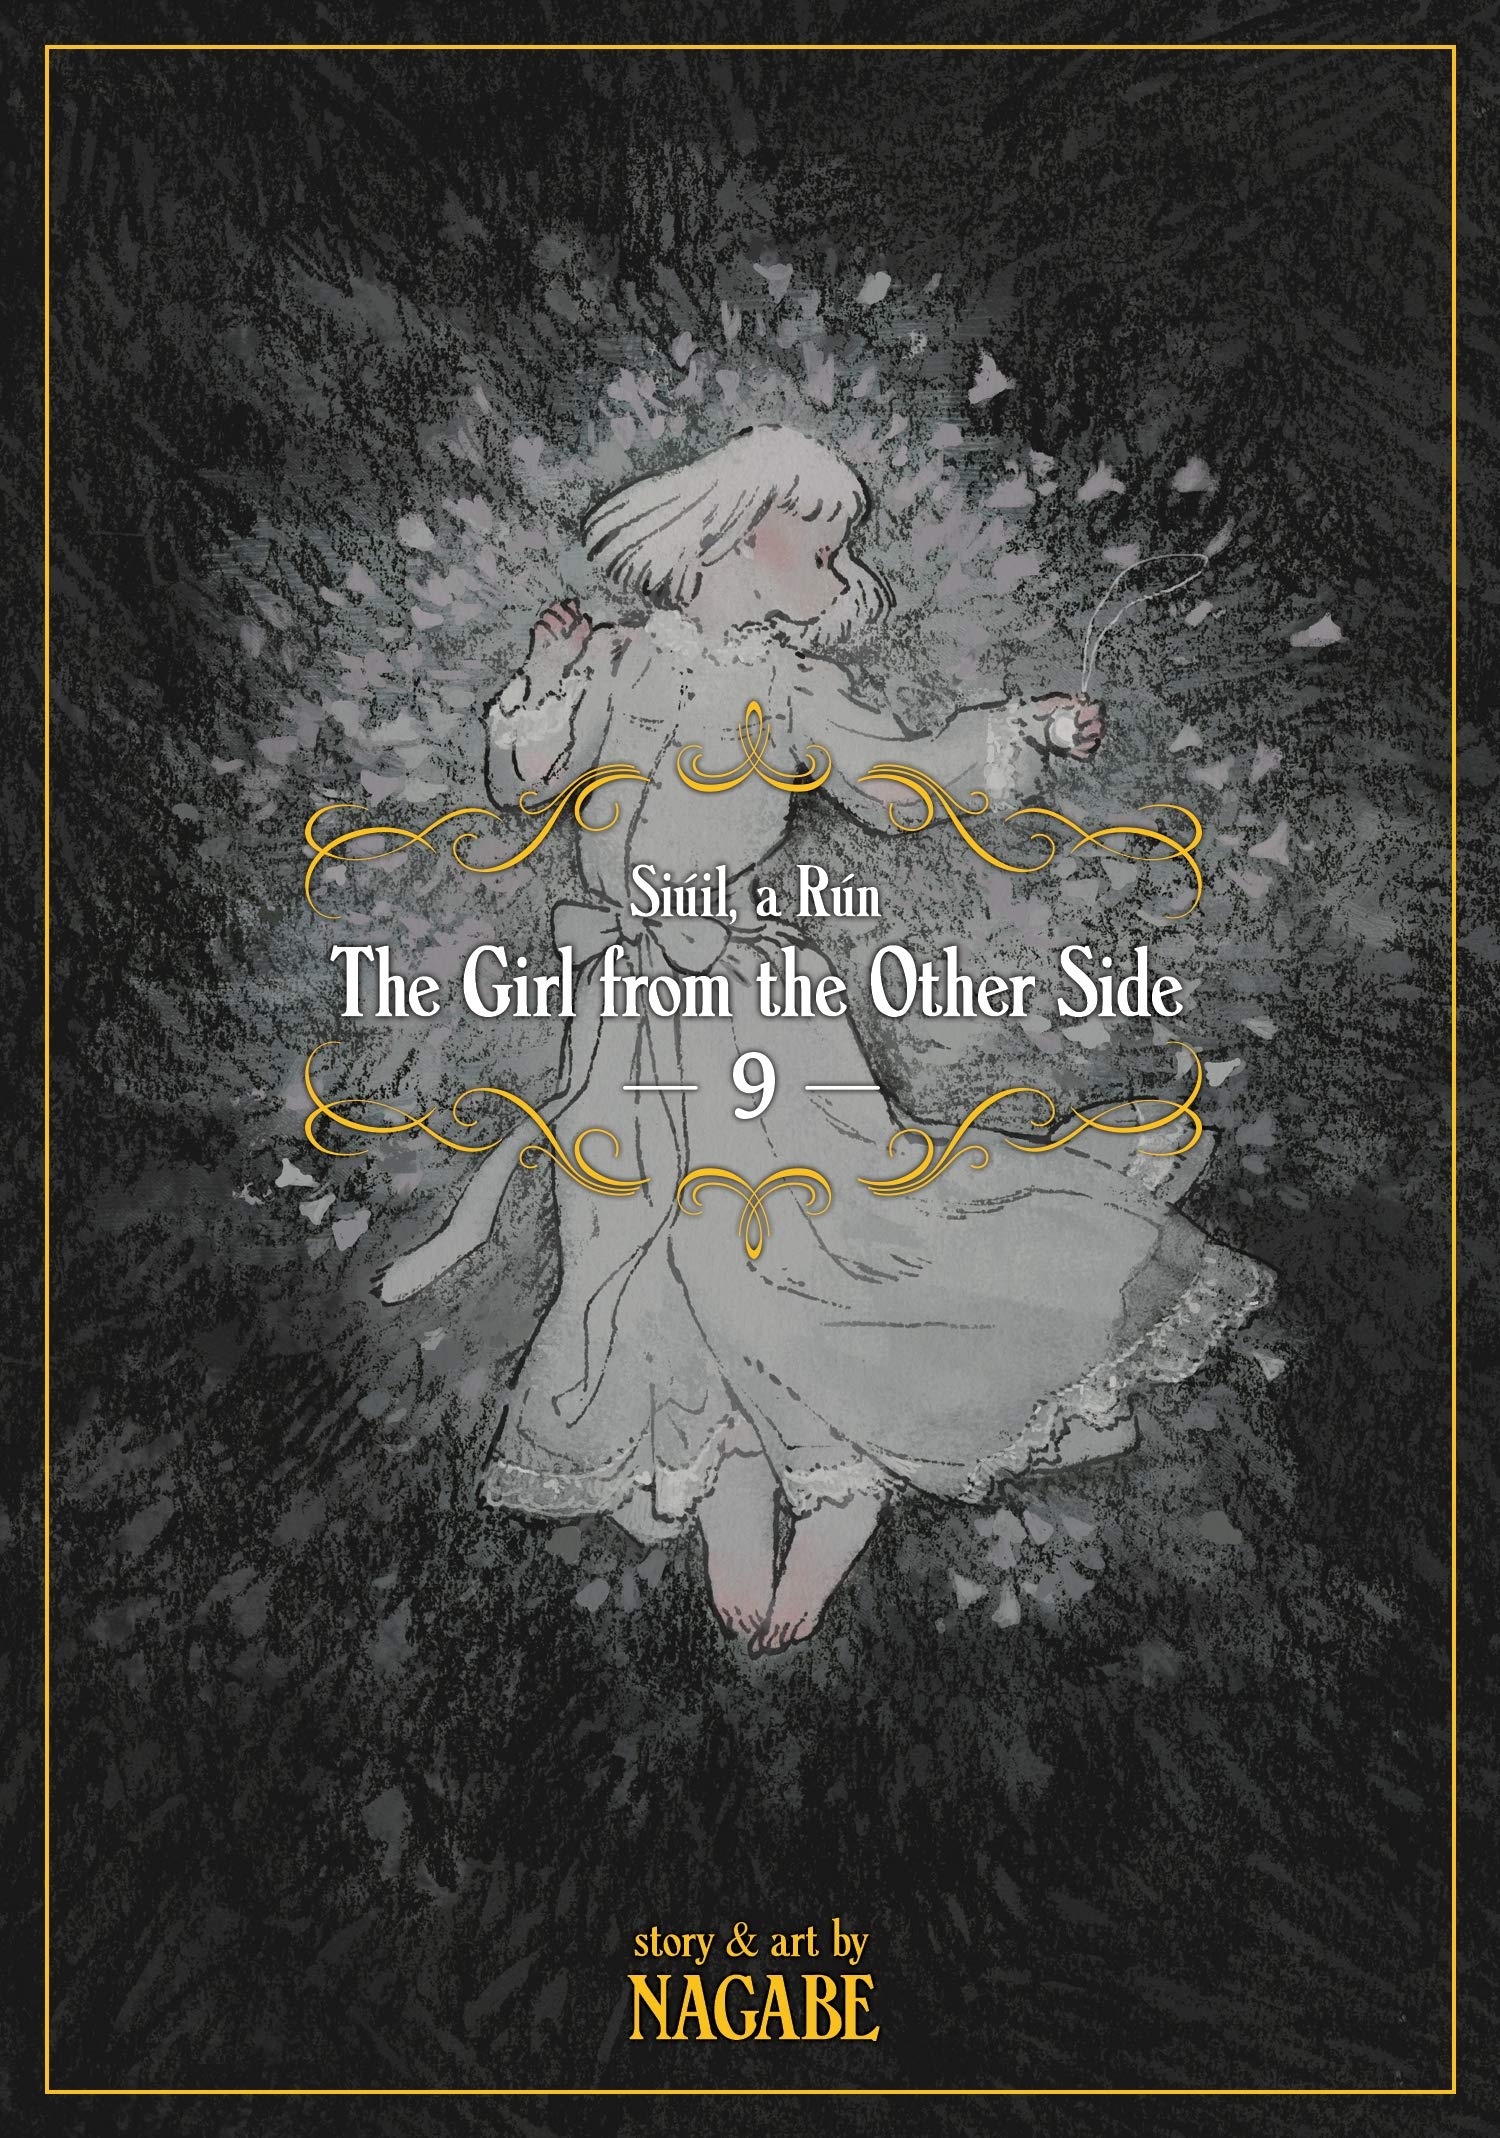 The Girl from the Other Side: Siuil, a Run. Volume 9 | Nagabe